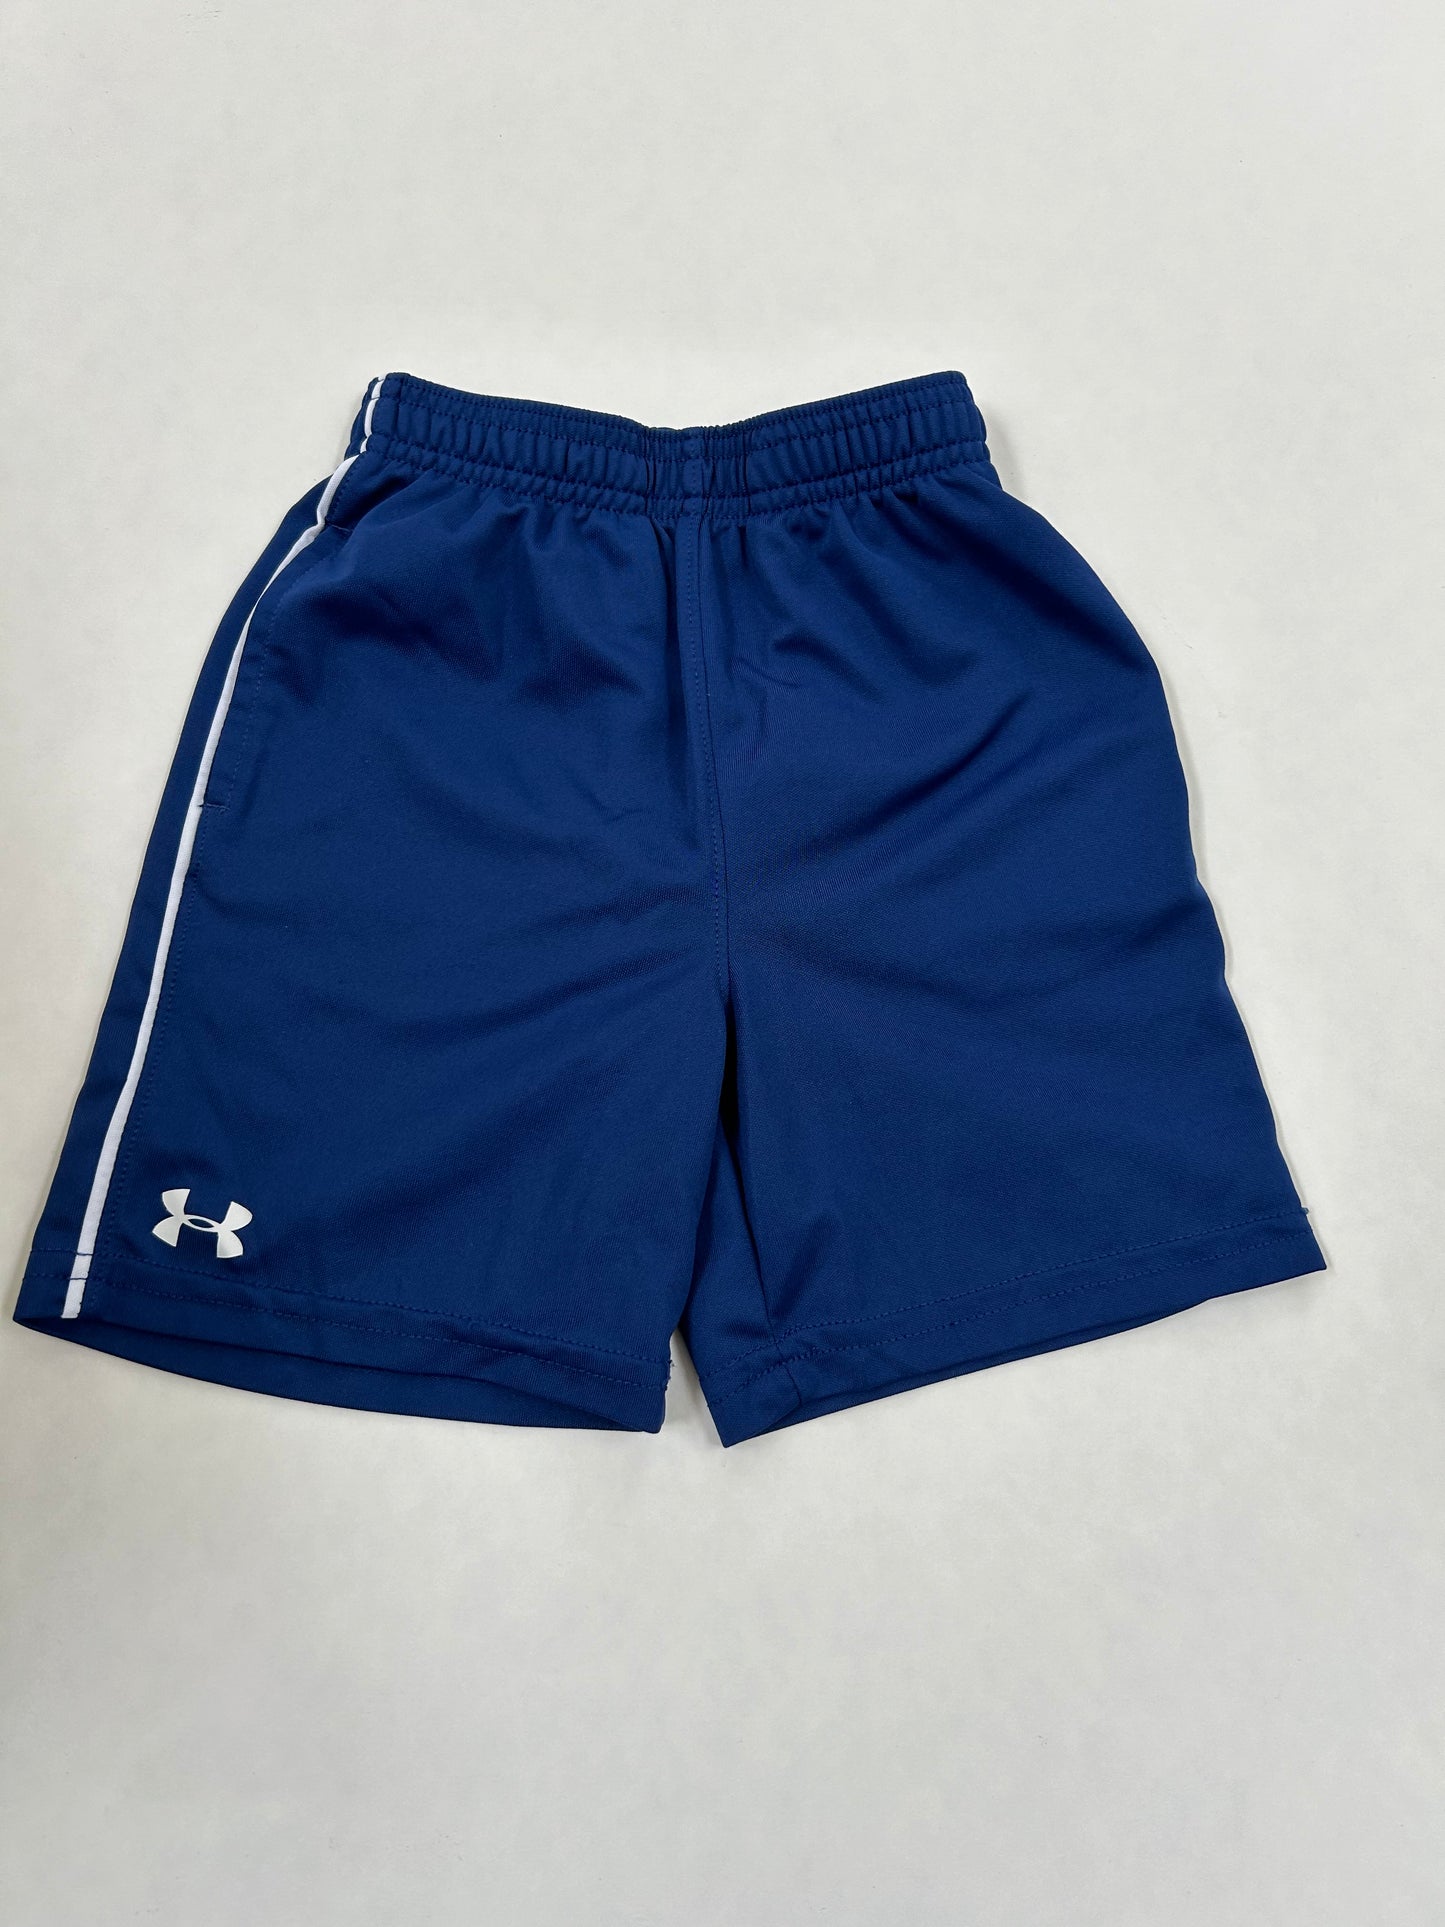 Boys 4T Under Armour Navy shorts with pockets